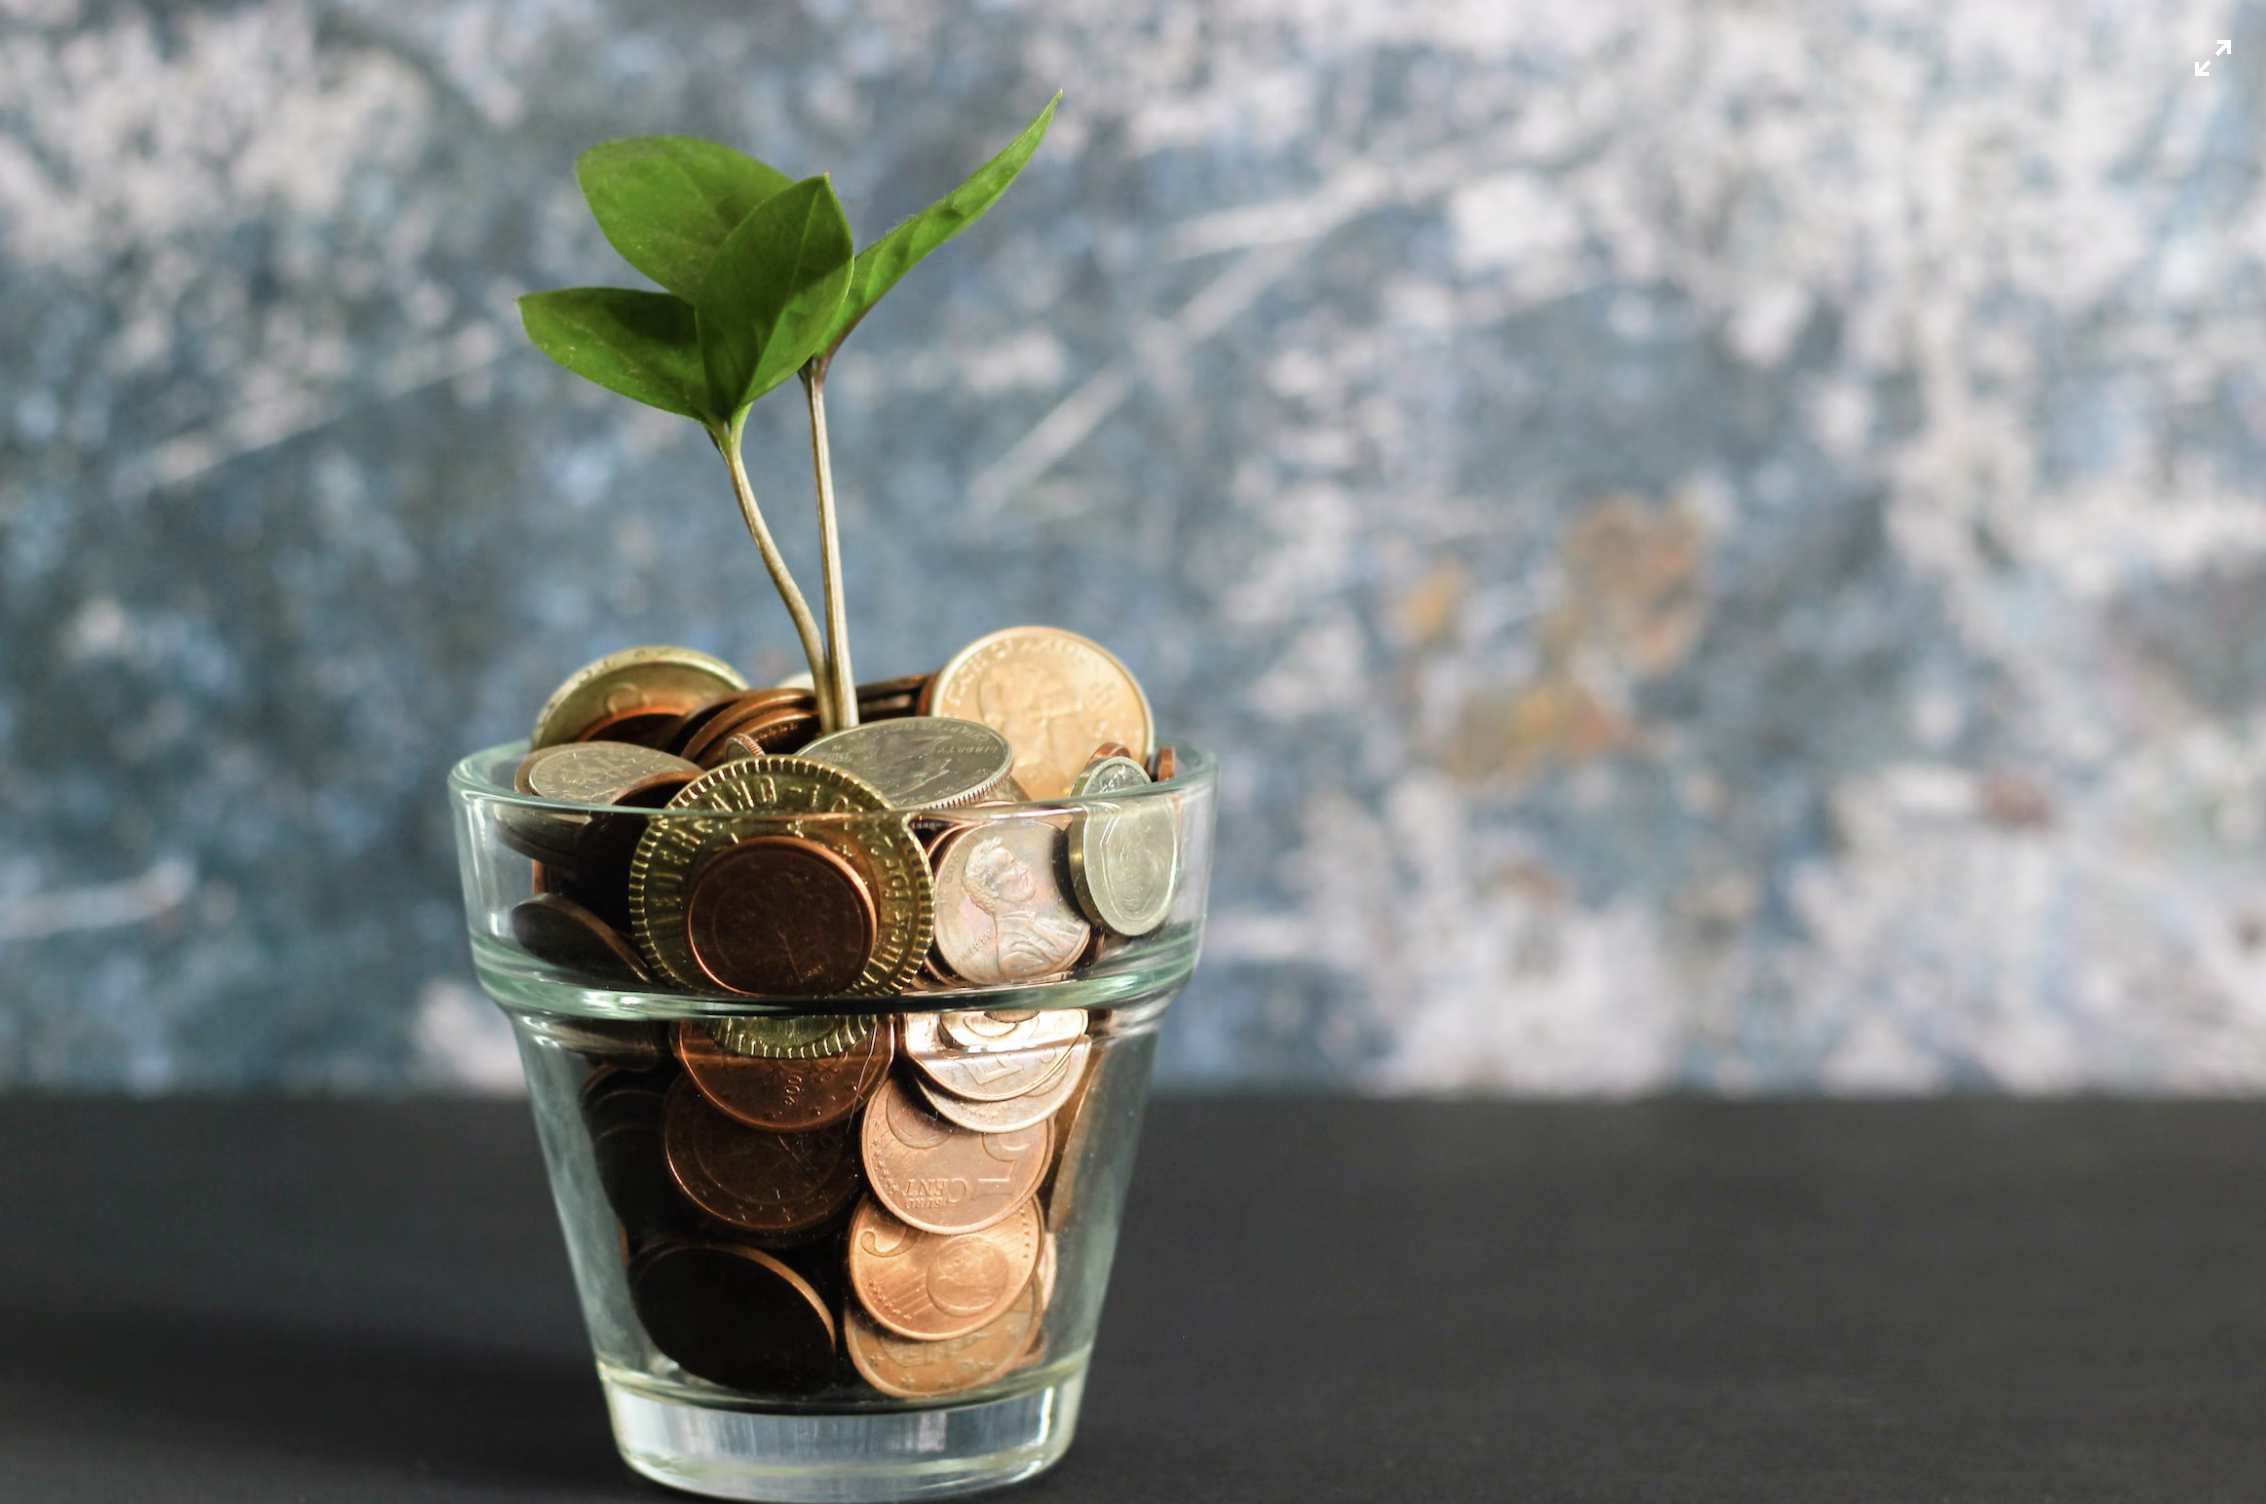 Money plant in cup of coins